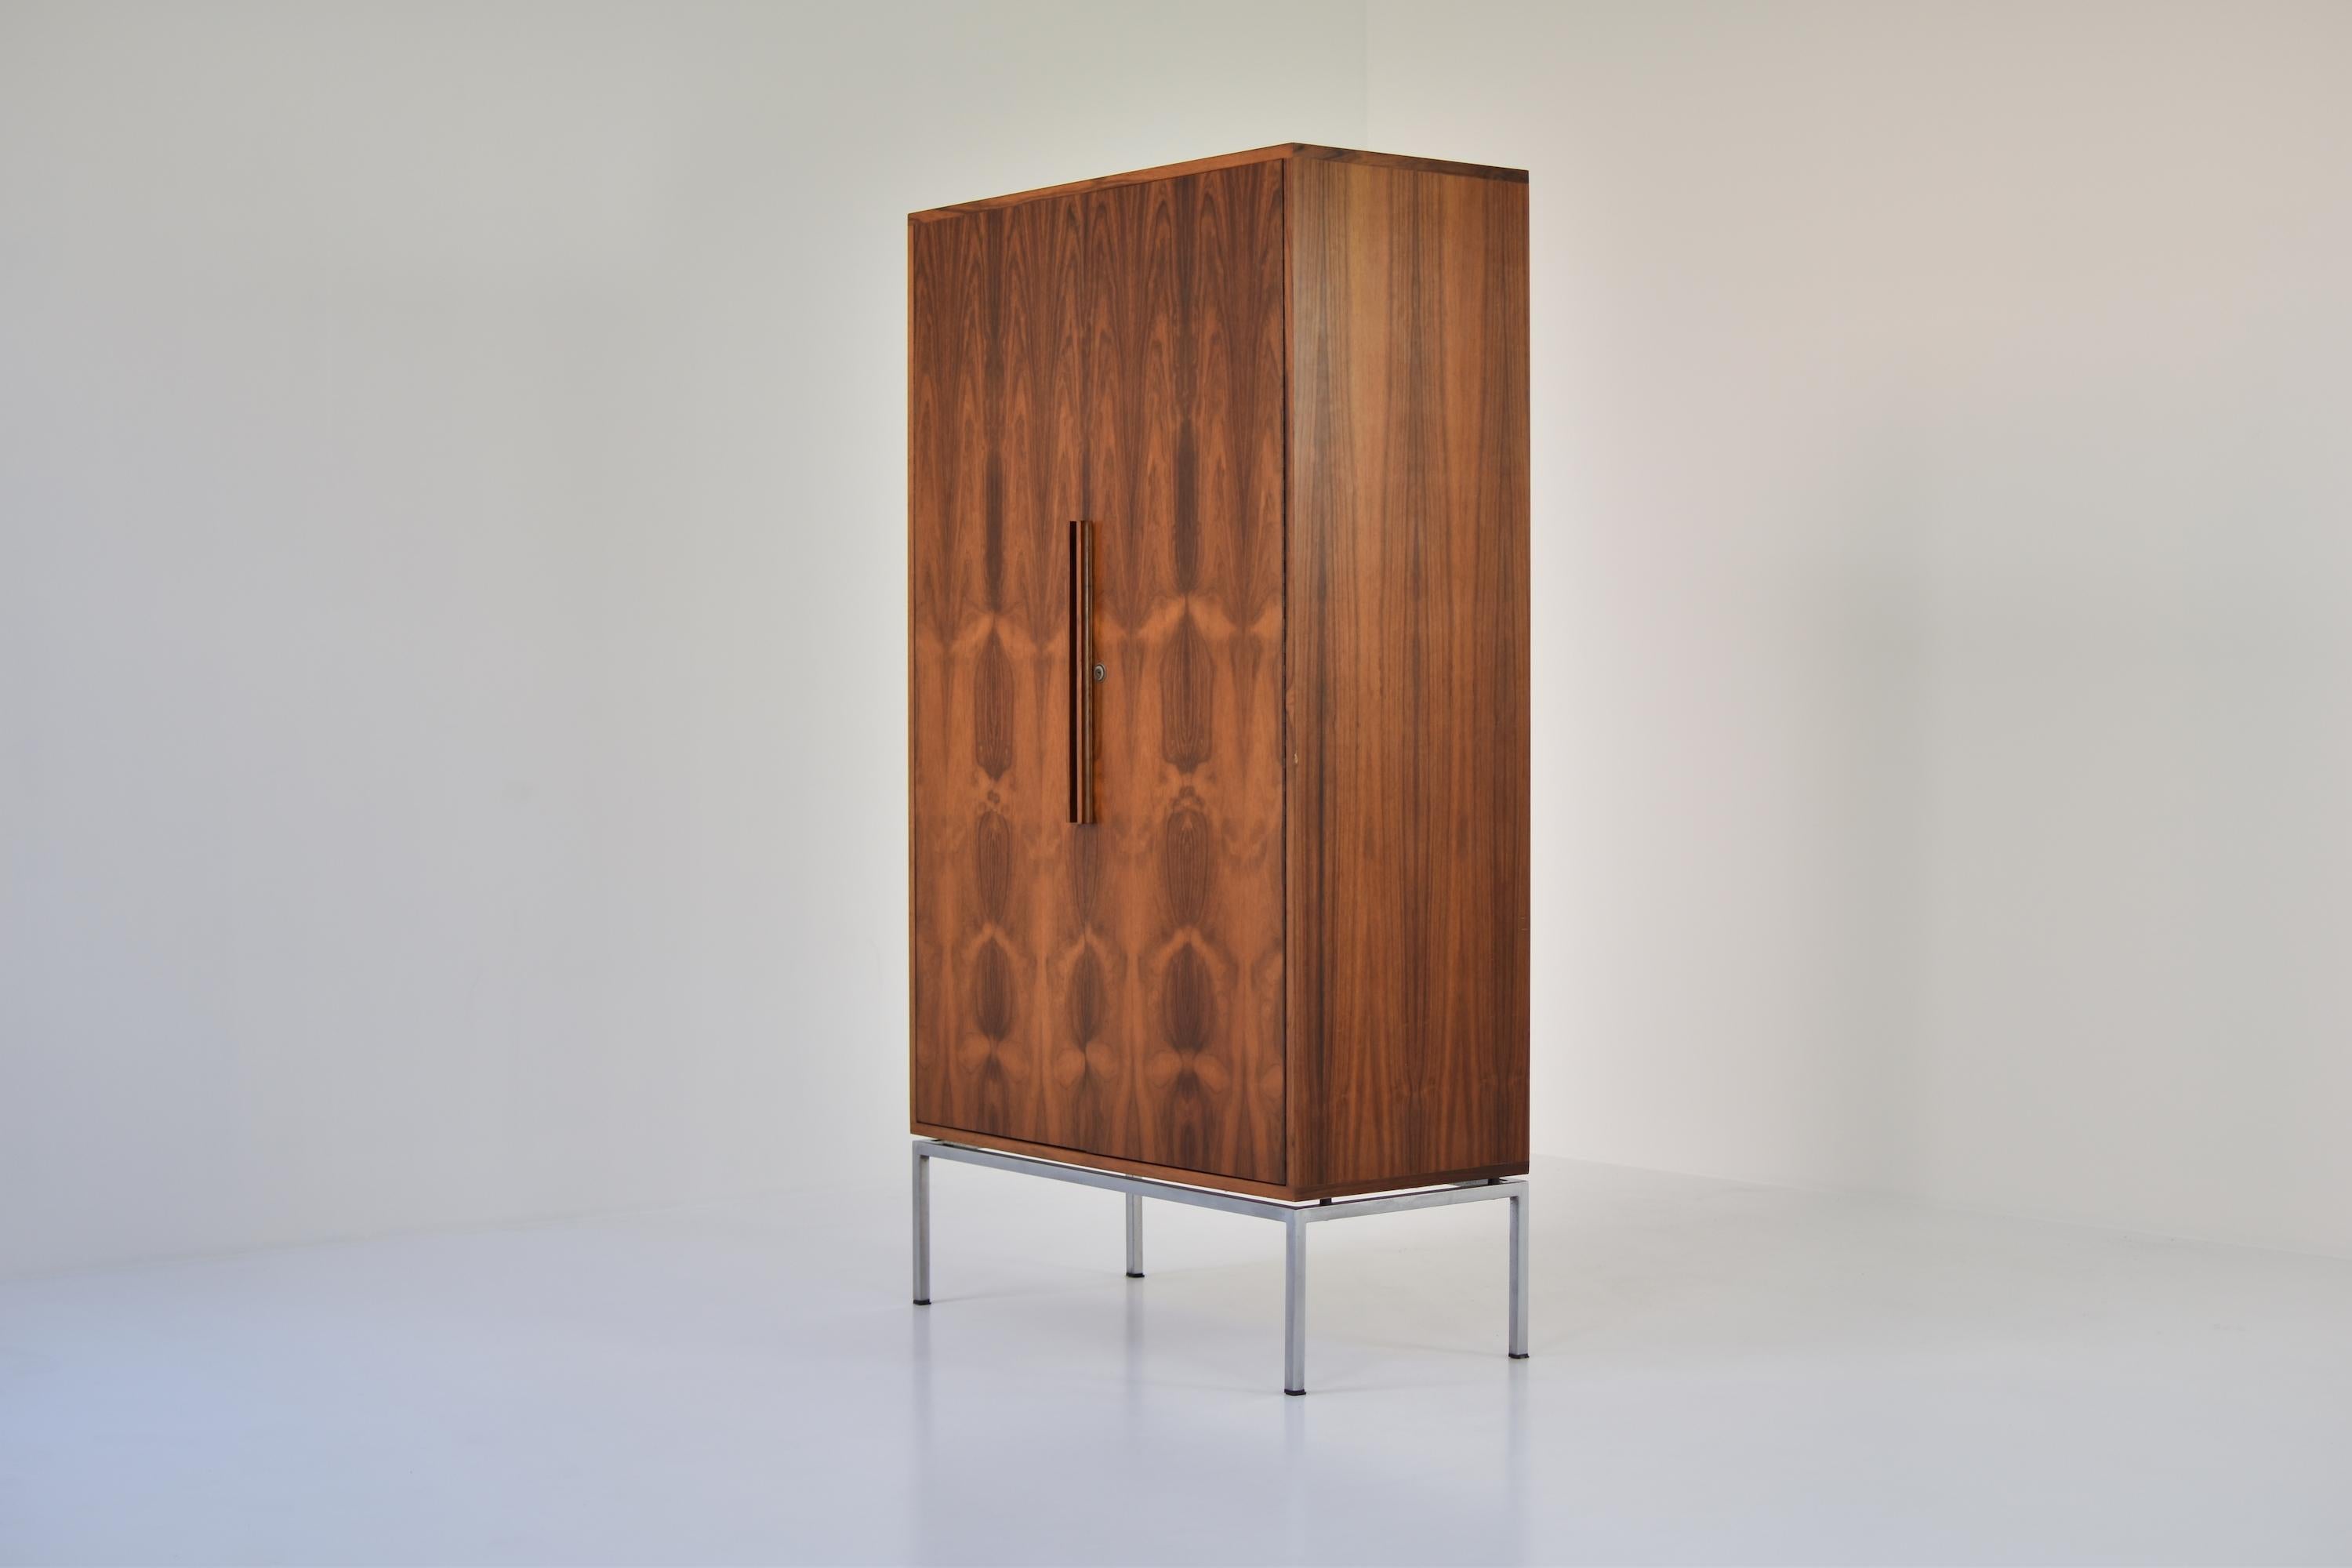 Impressive rosewood highboard from the 1960s. This cabinet features 2 doors revealing plenty of storage area. Very nice grain on the rosewood. Designer unknown.